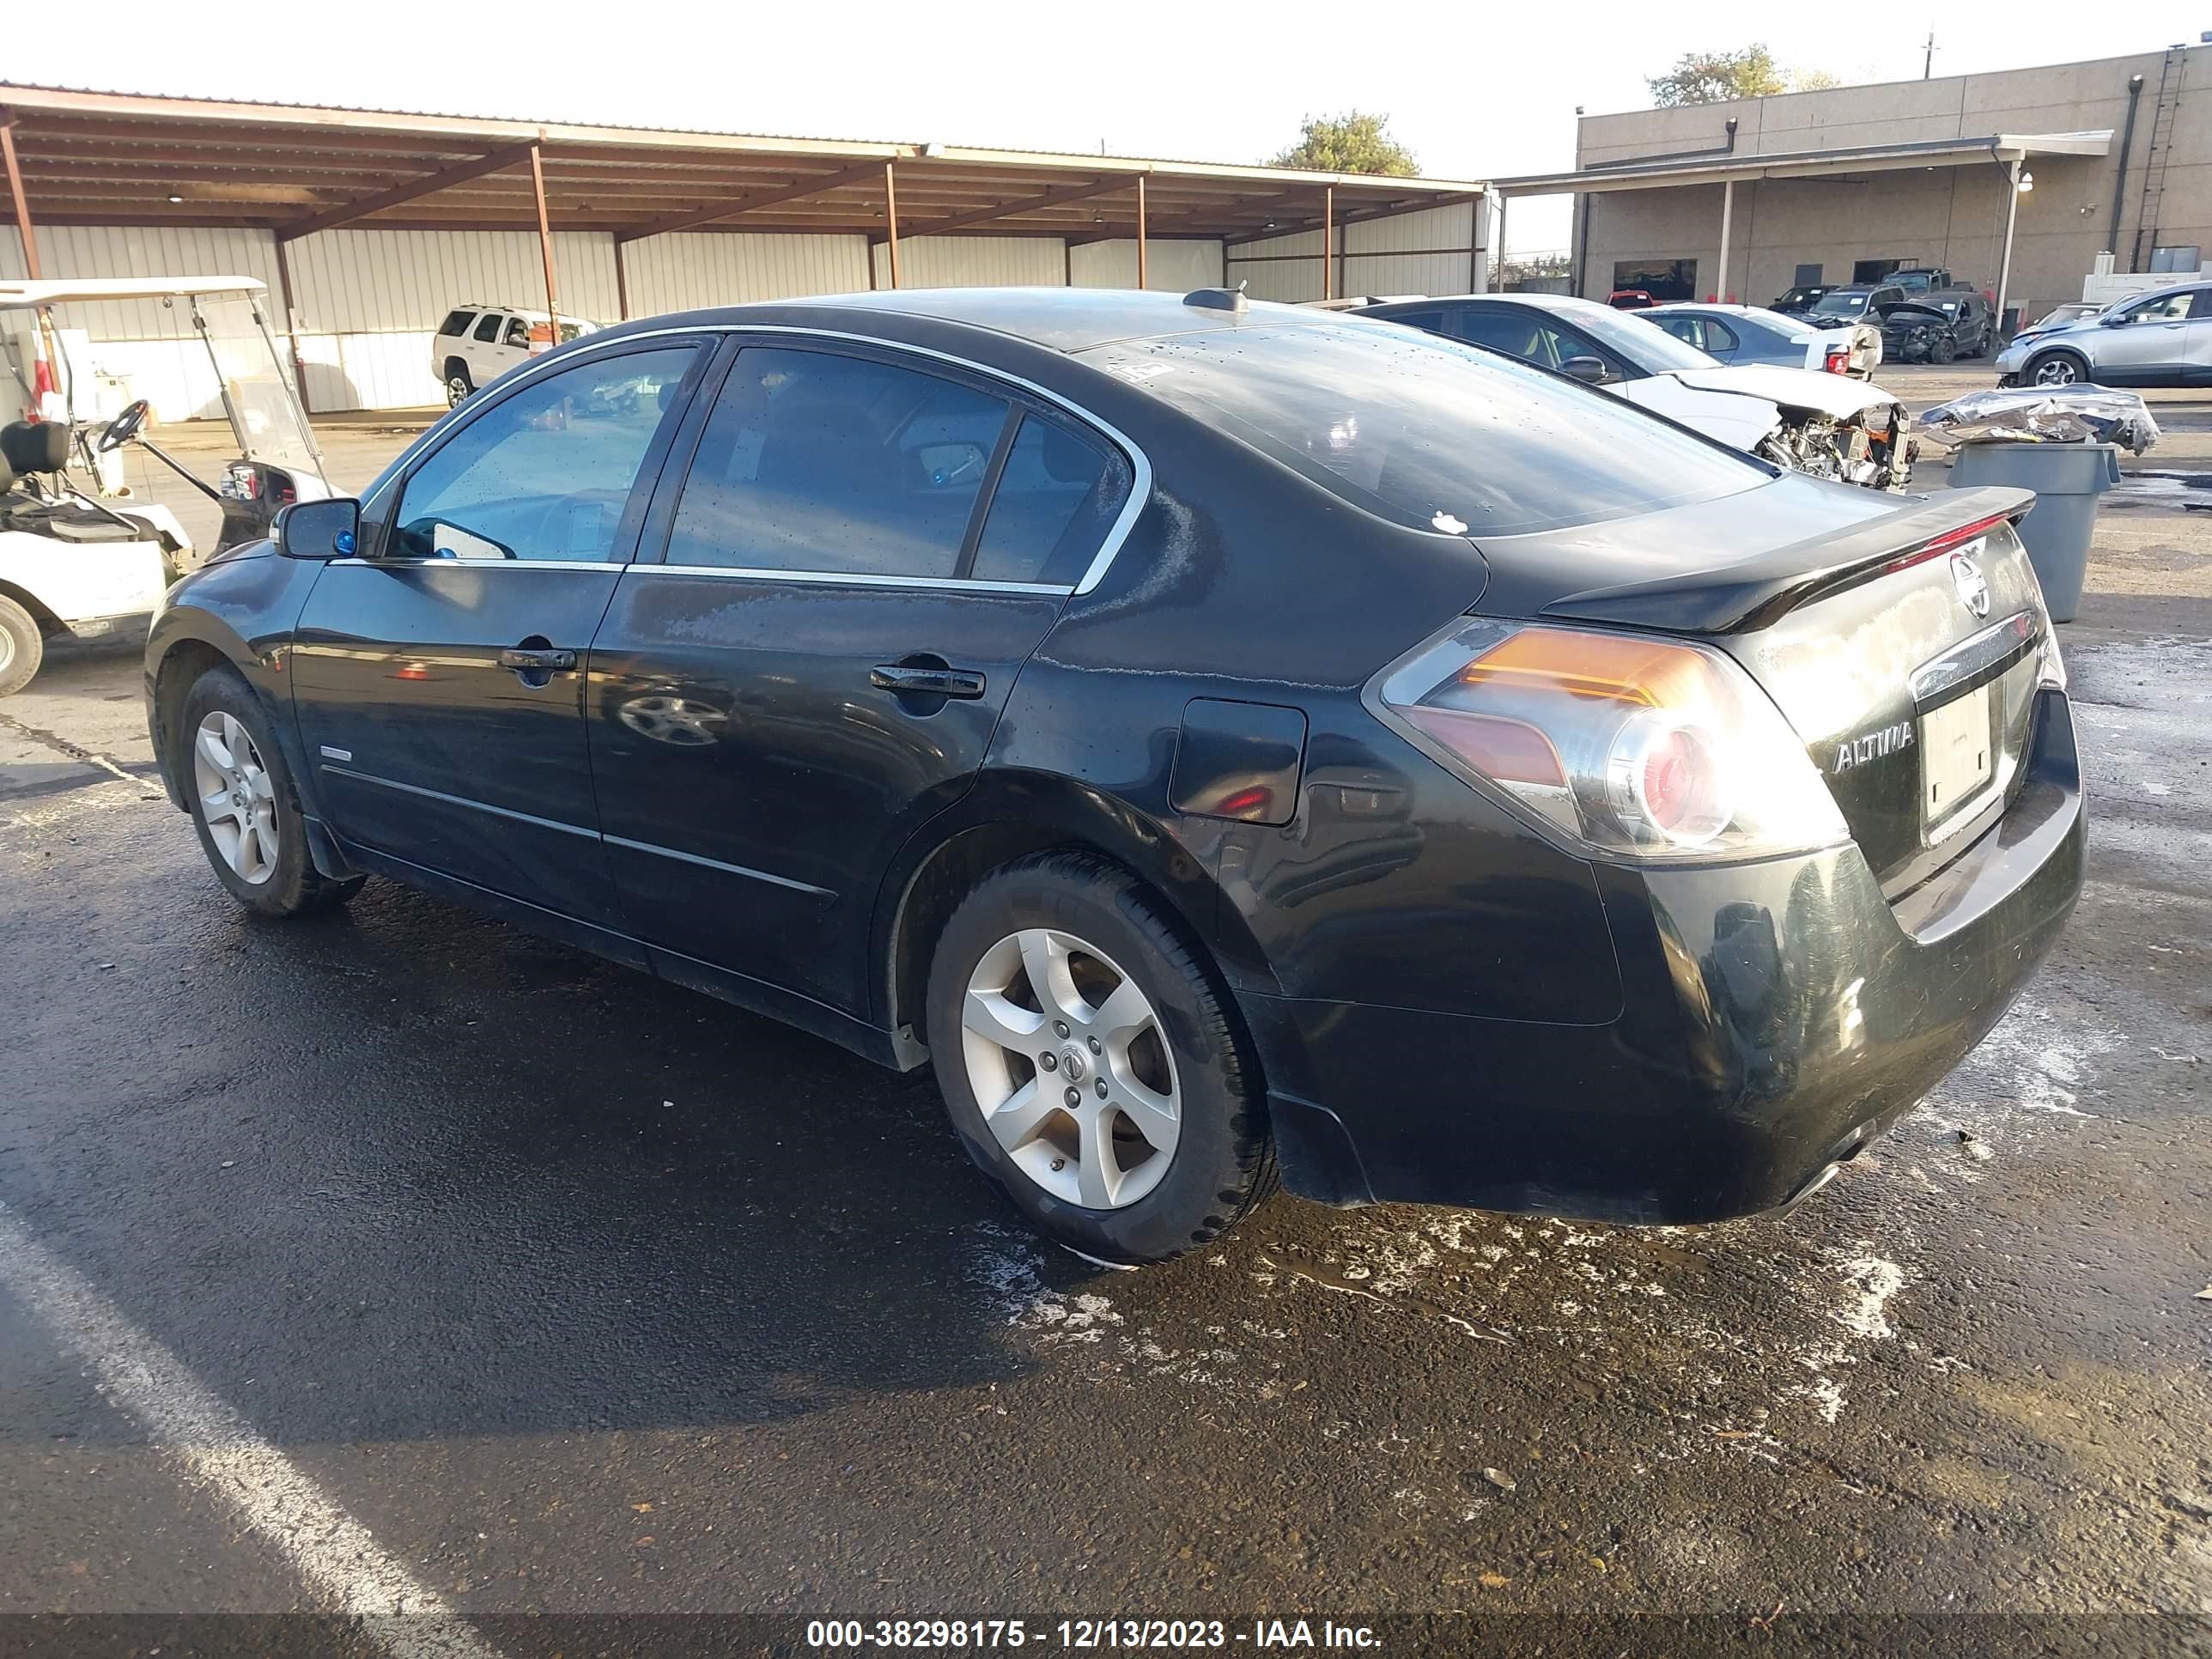 1N4CL21E88C157169  - NISSAN ALTIMA  2008 IMG - 2